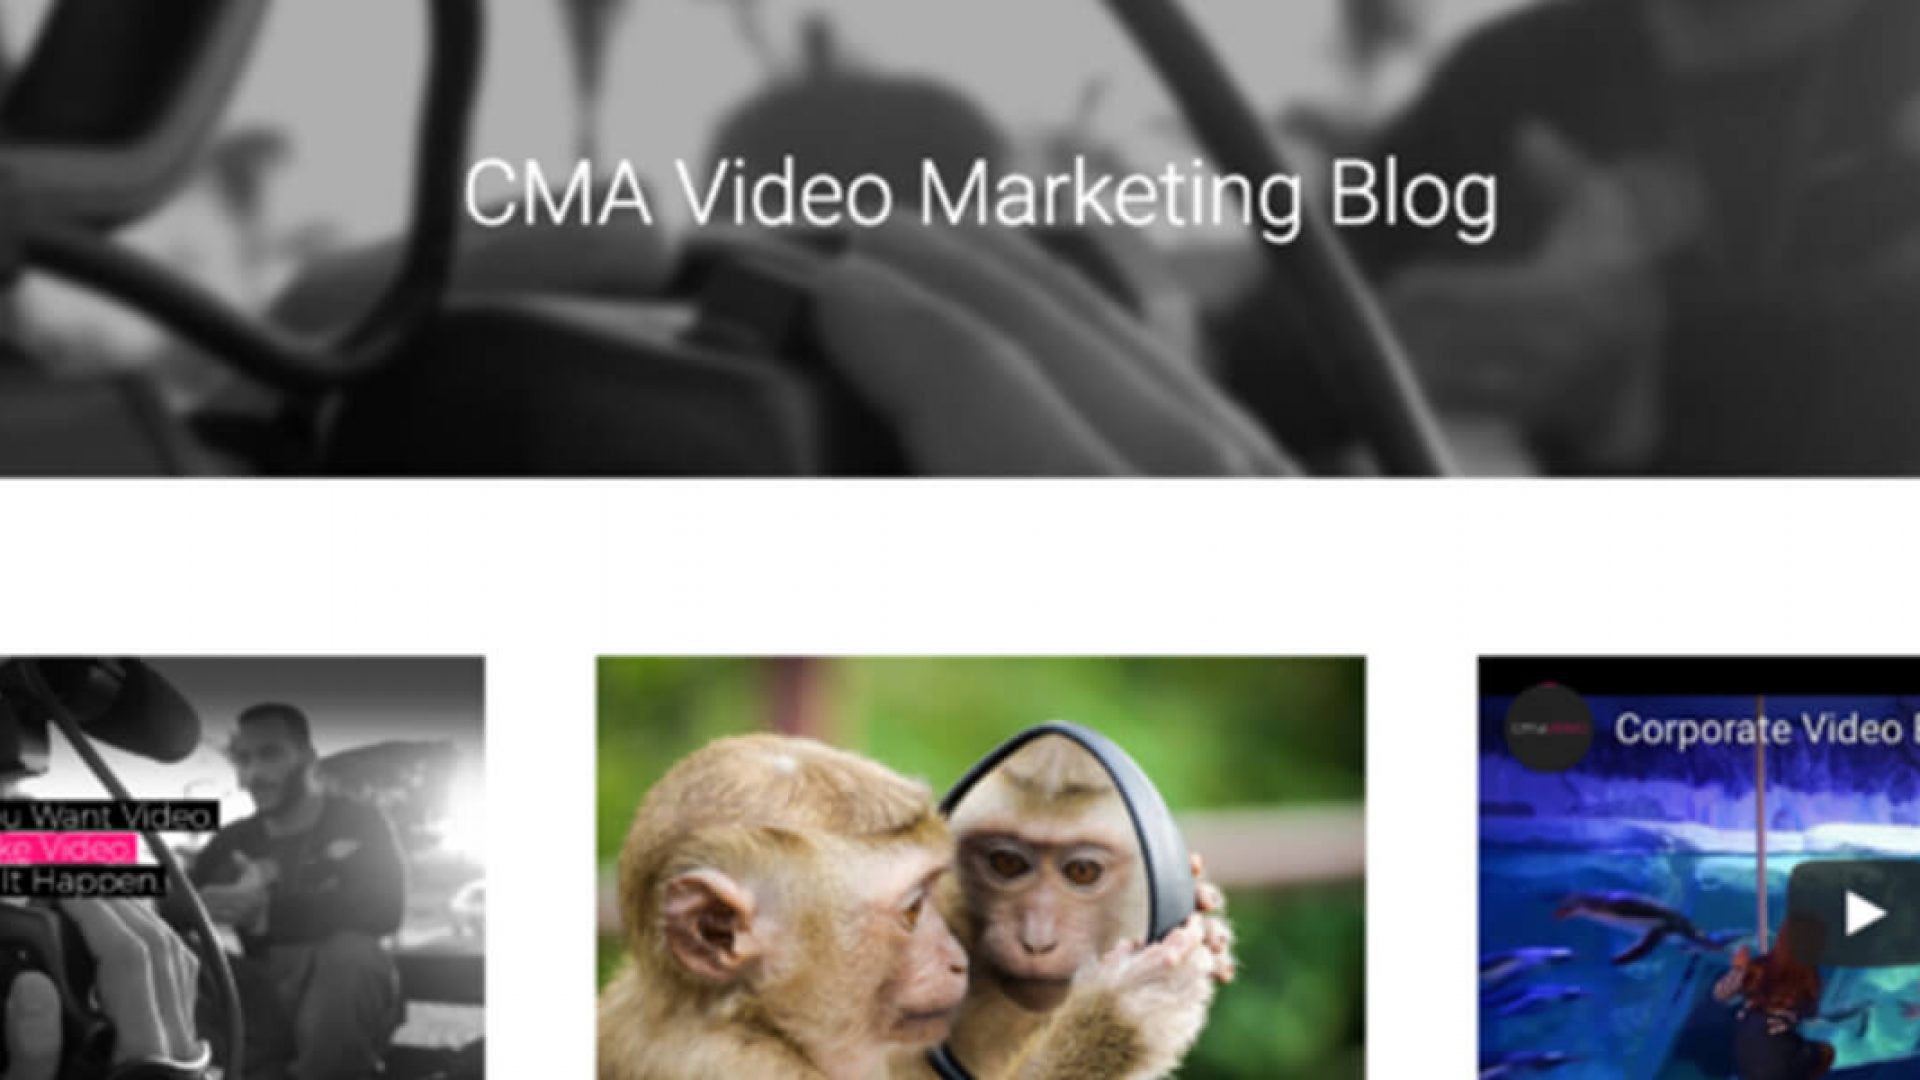 CMA Video Blog Recognised Amongst Best On The Web